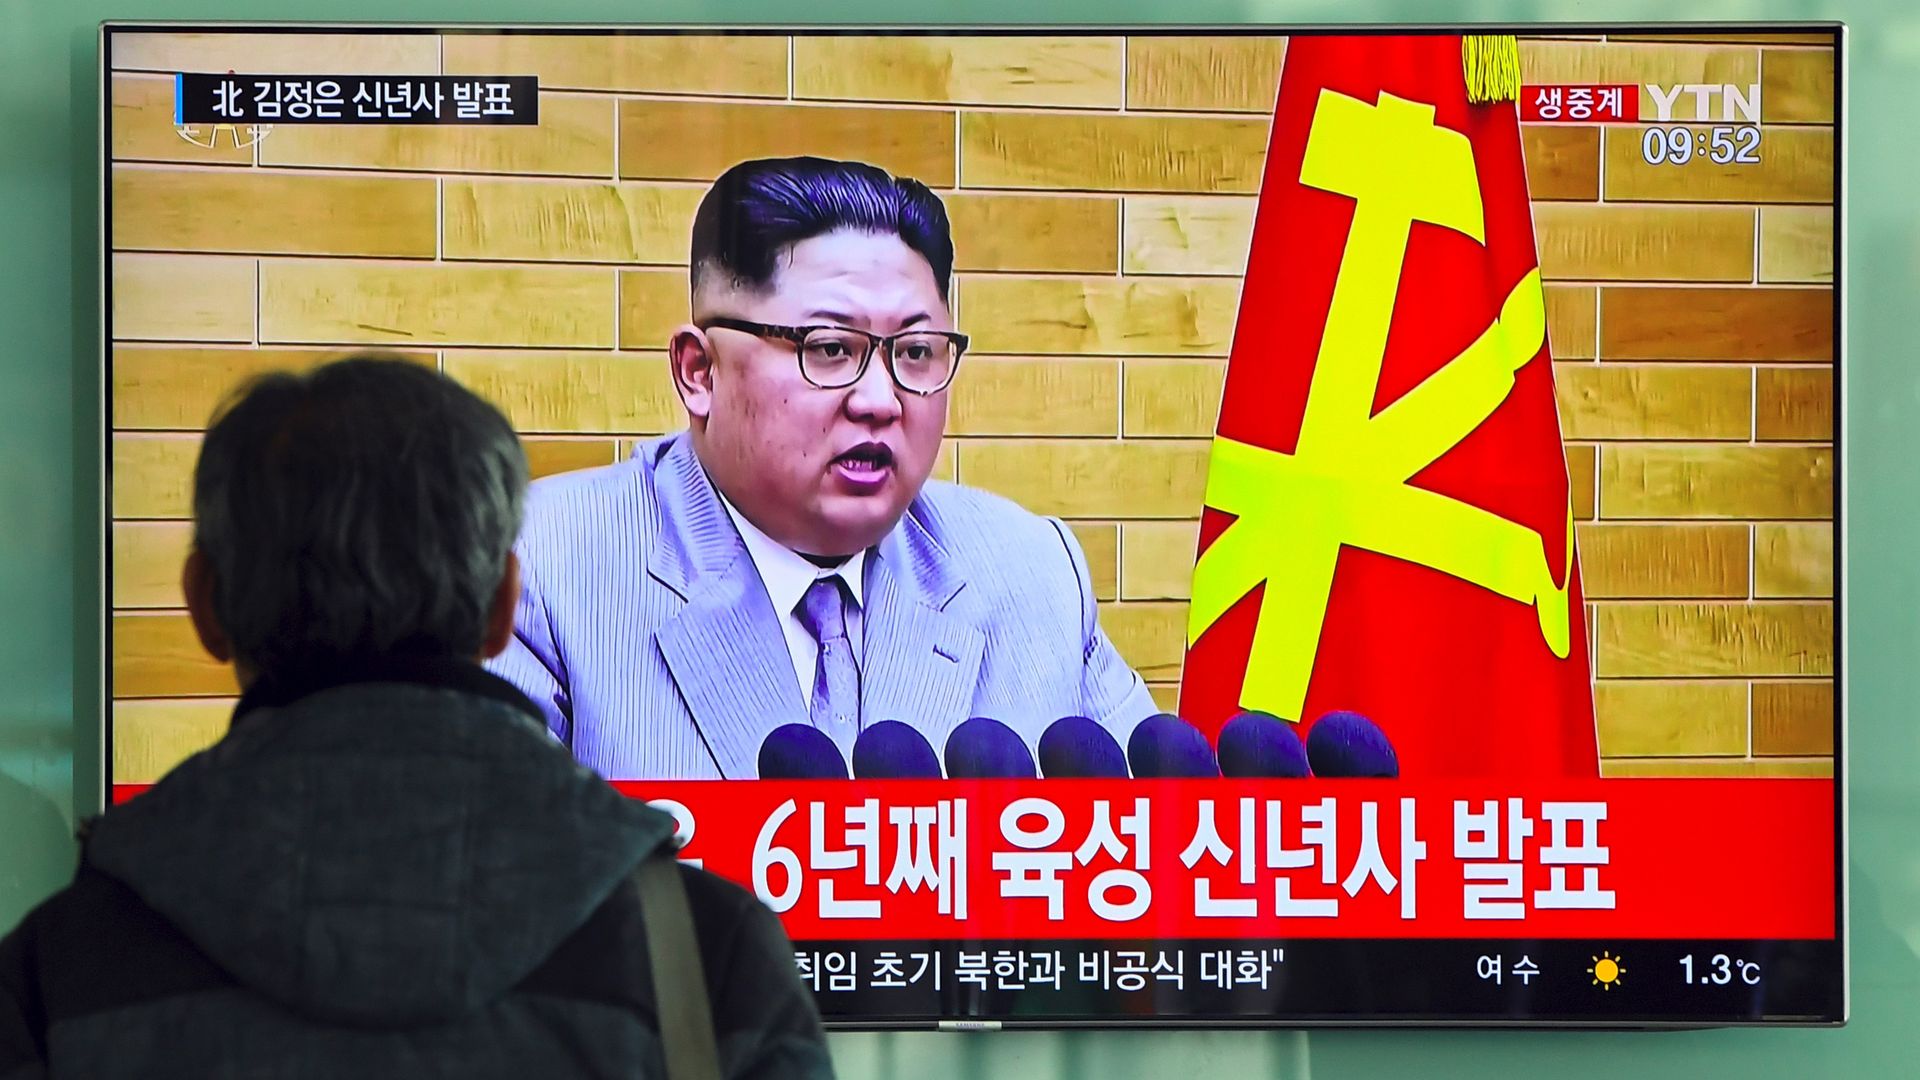 A man watches a television news broadcast showing Kim Jong-Un.